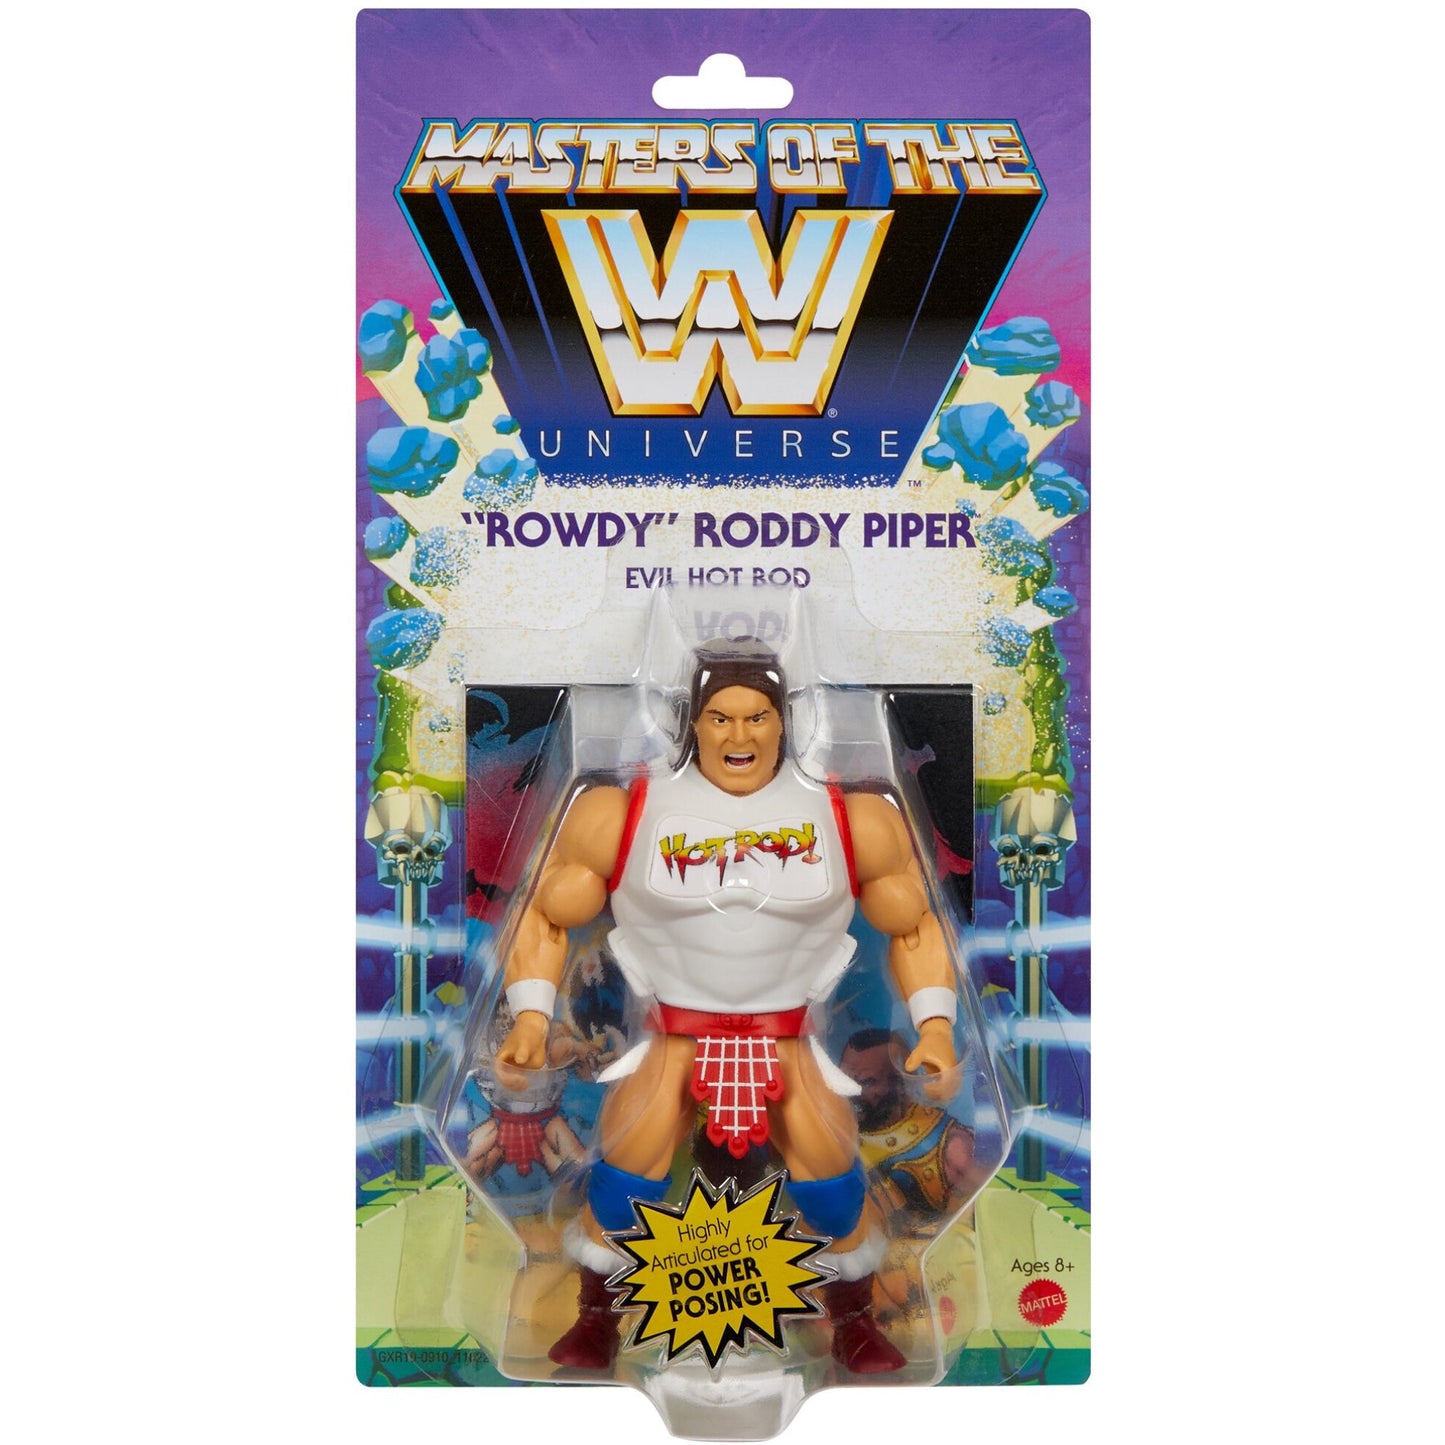 WWE Mattel Masters of the WWE Universe 5 "Rowdy" Roddy Piper [Exclusive]